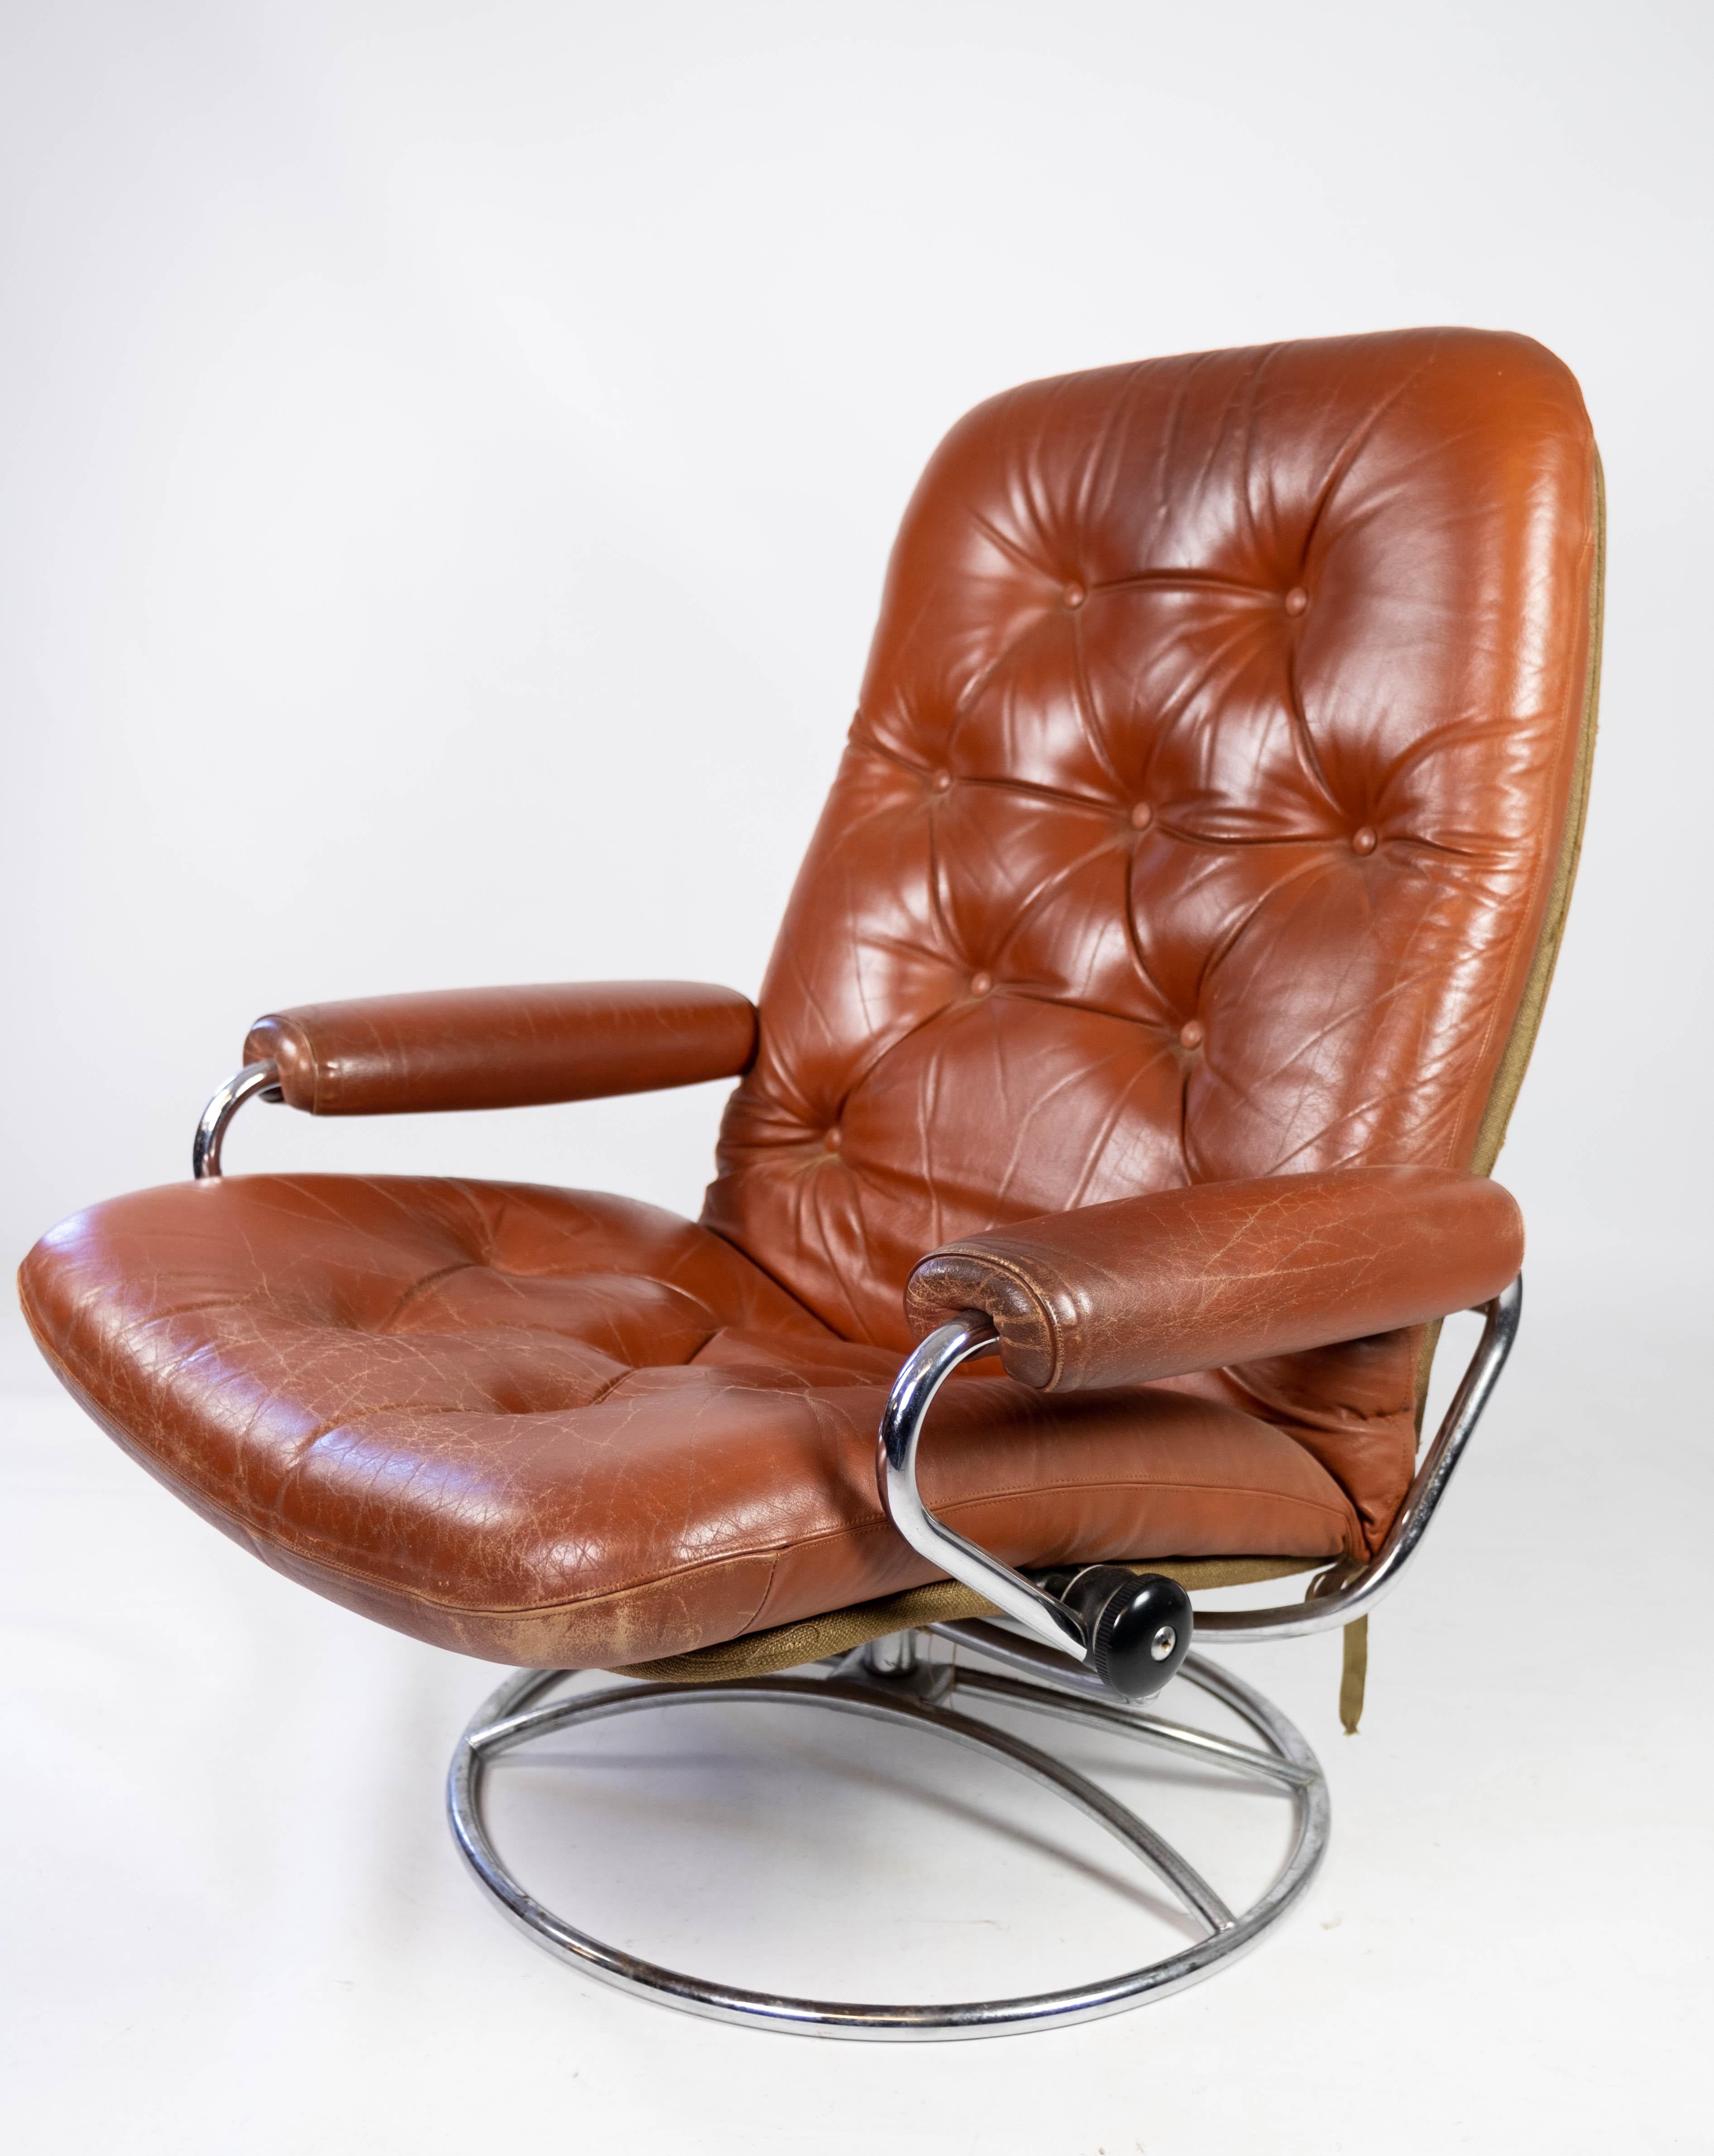 Armchair upholstered with red leather and frame of metal, of Danish design from the 1960s. The chair is in great vintage condition.
 